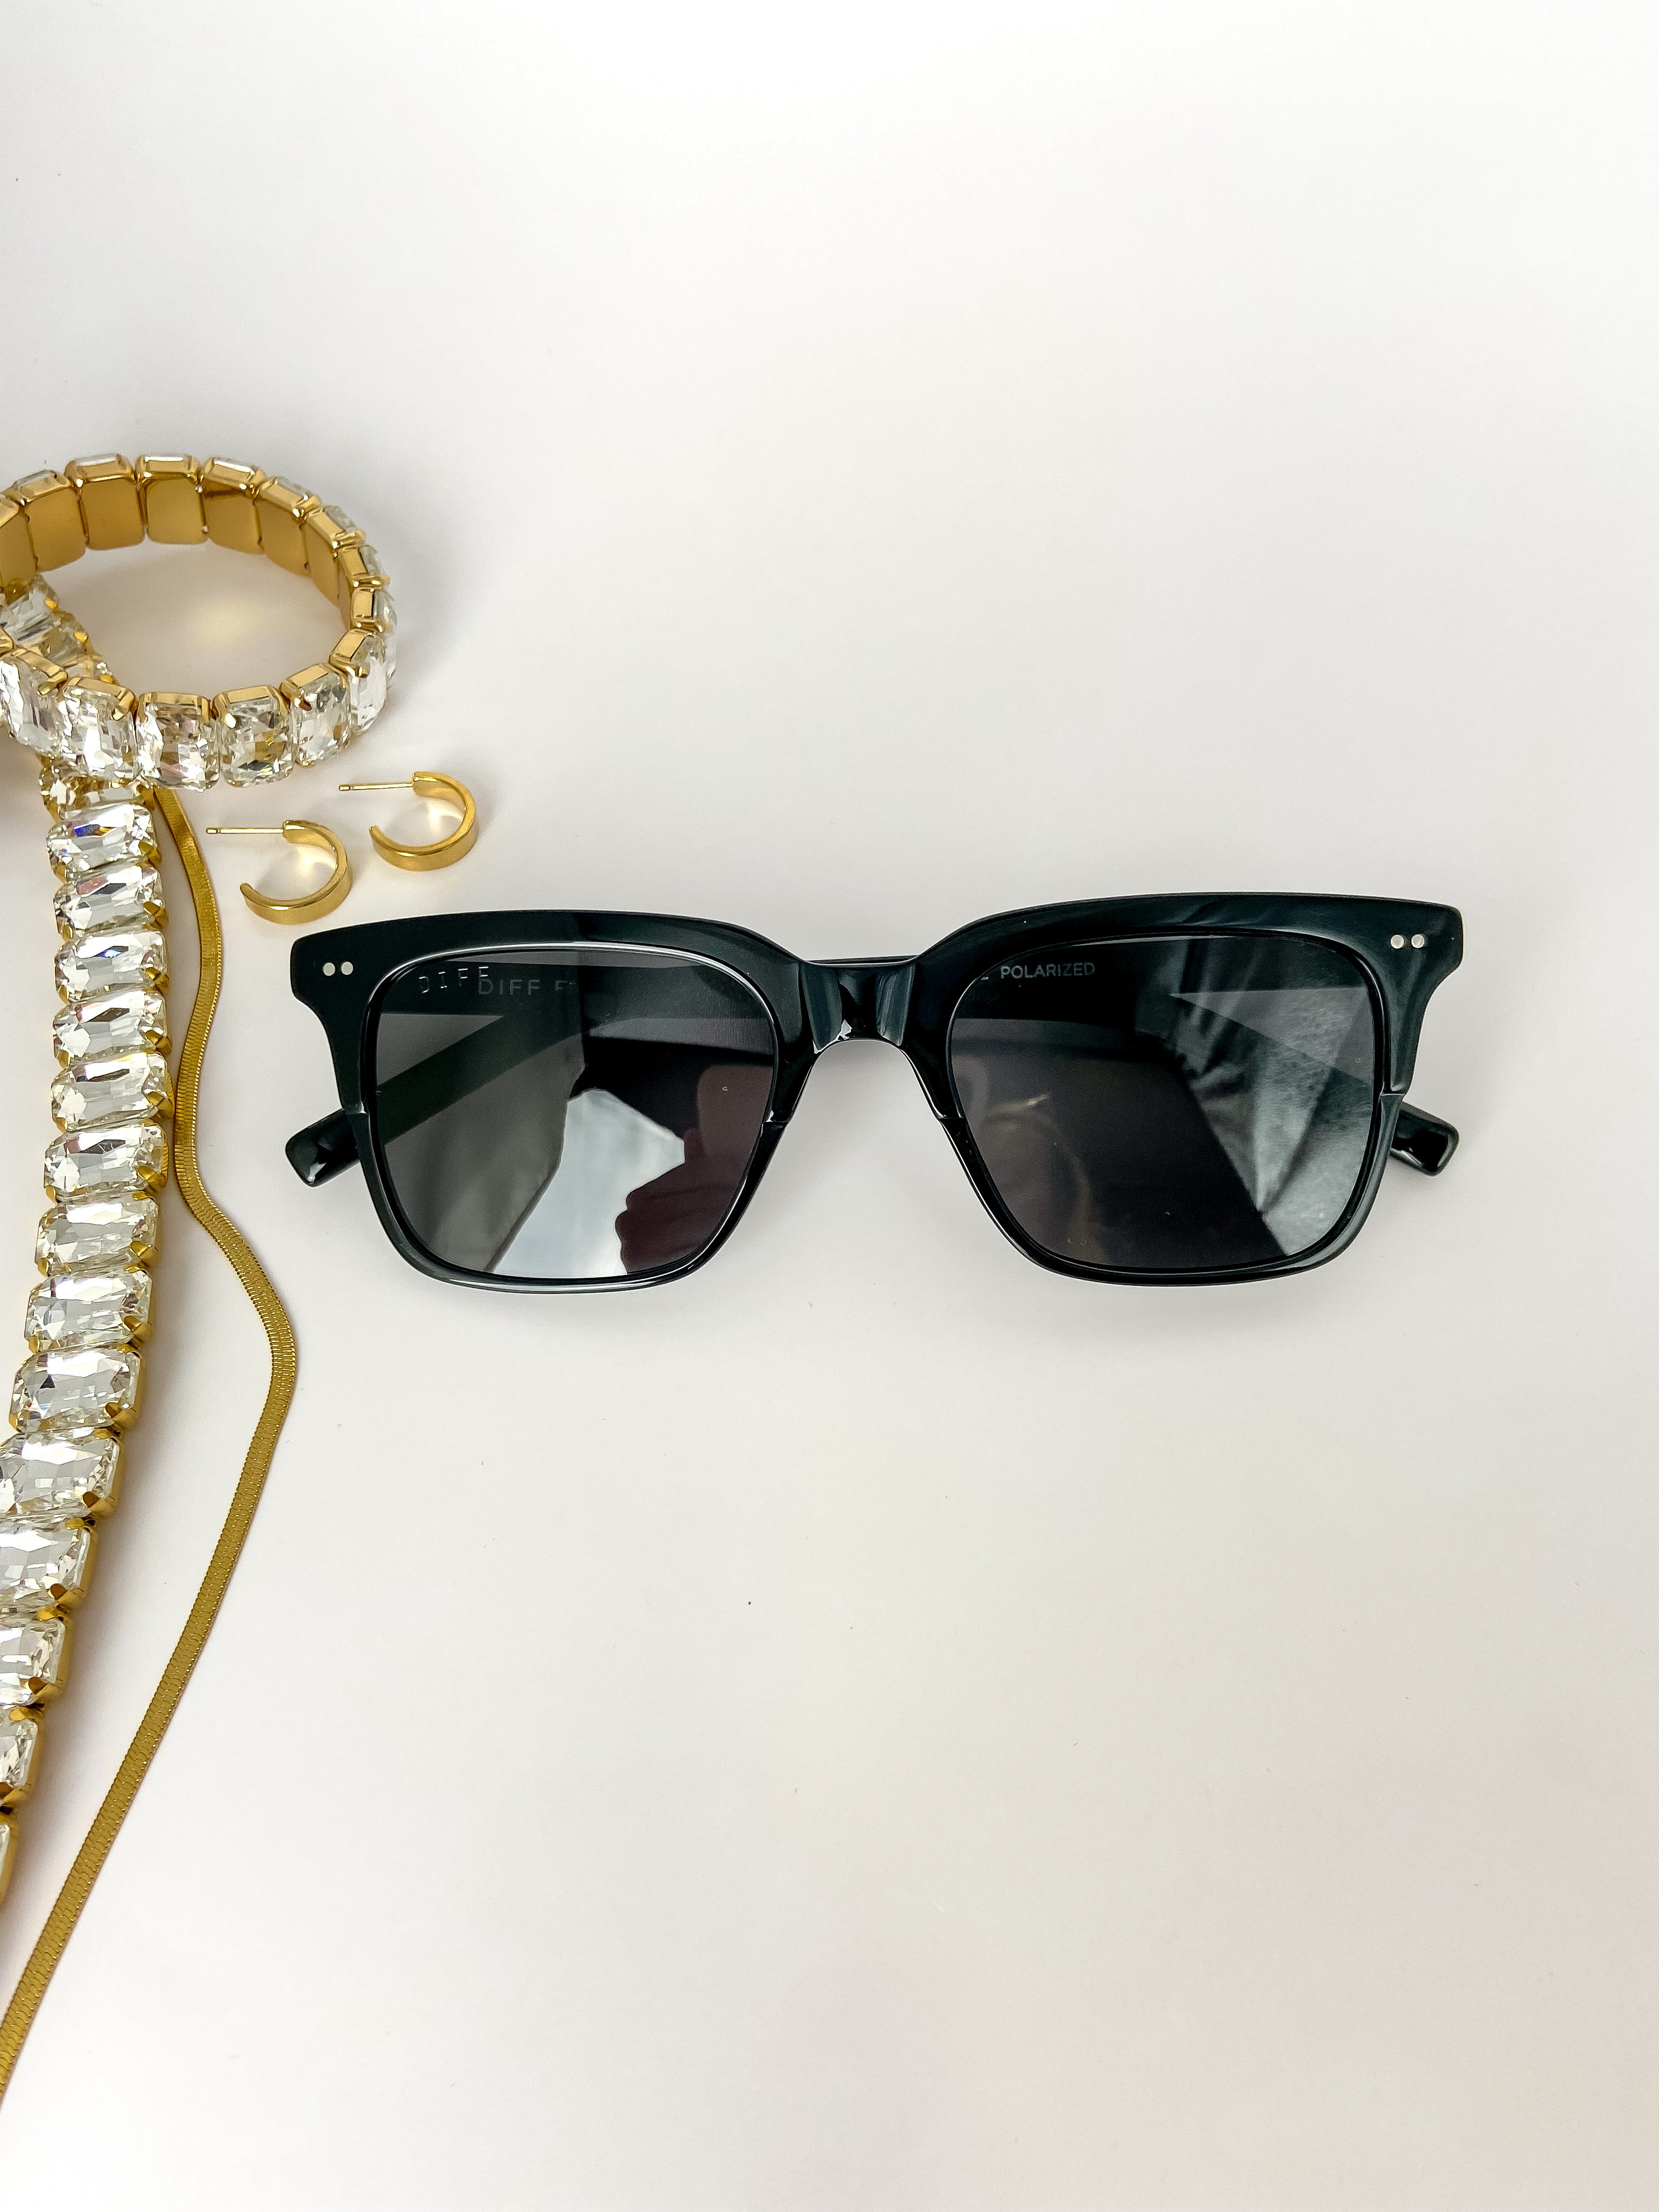 DIFF | Billie Polarized Grey Lens Sunglasses in Black - Giddy Up Glamour Boutique